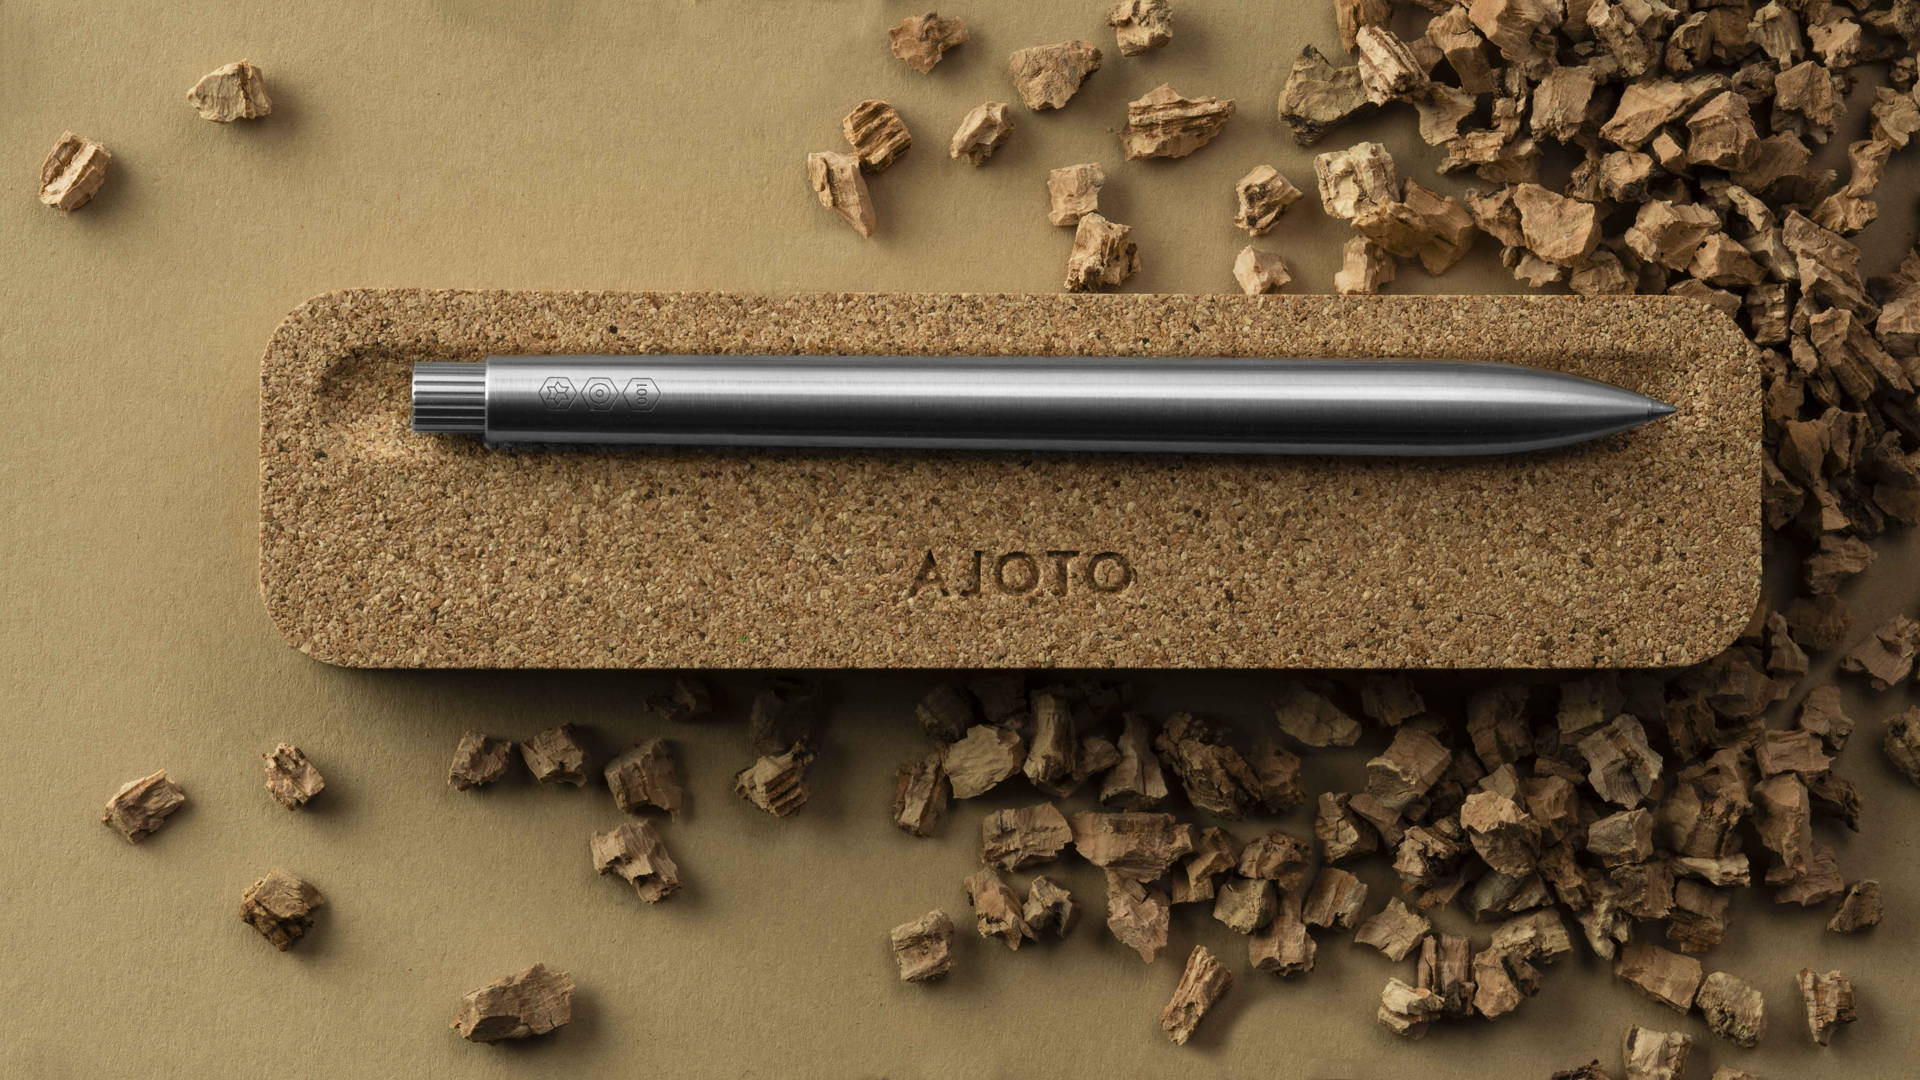 Featured image for AJOTO: This Pen's Cork Packaging Is Functional And Sleek